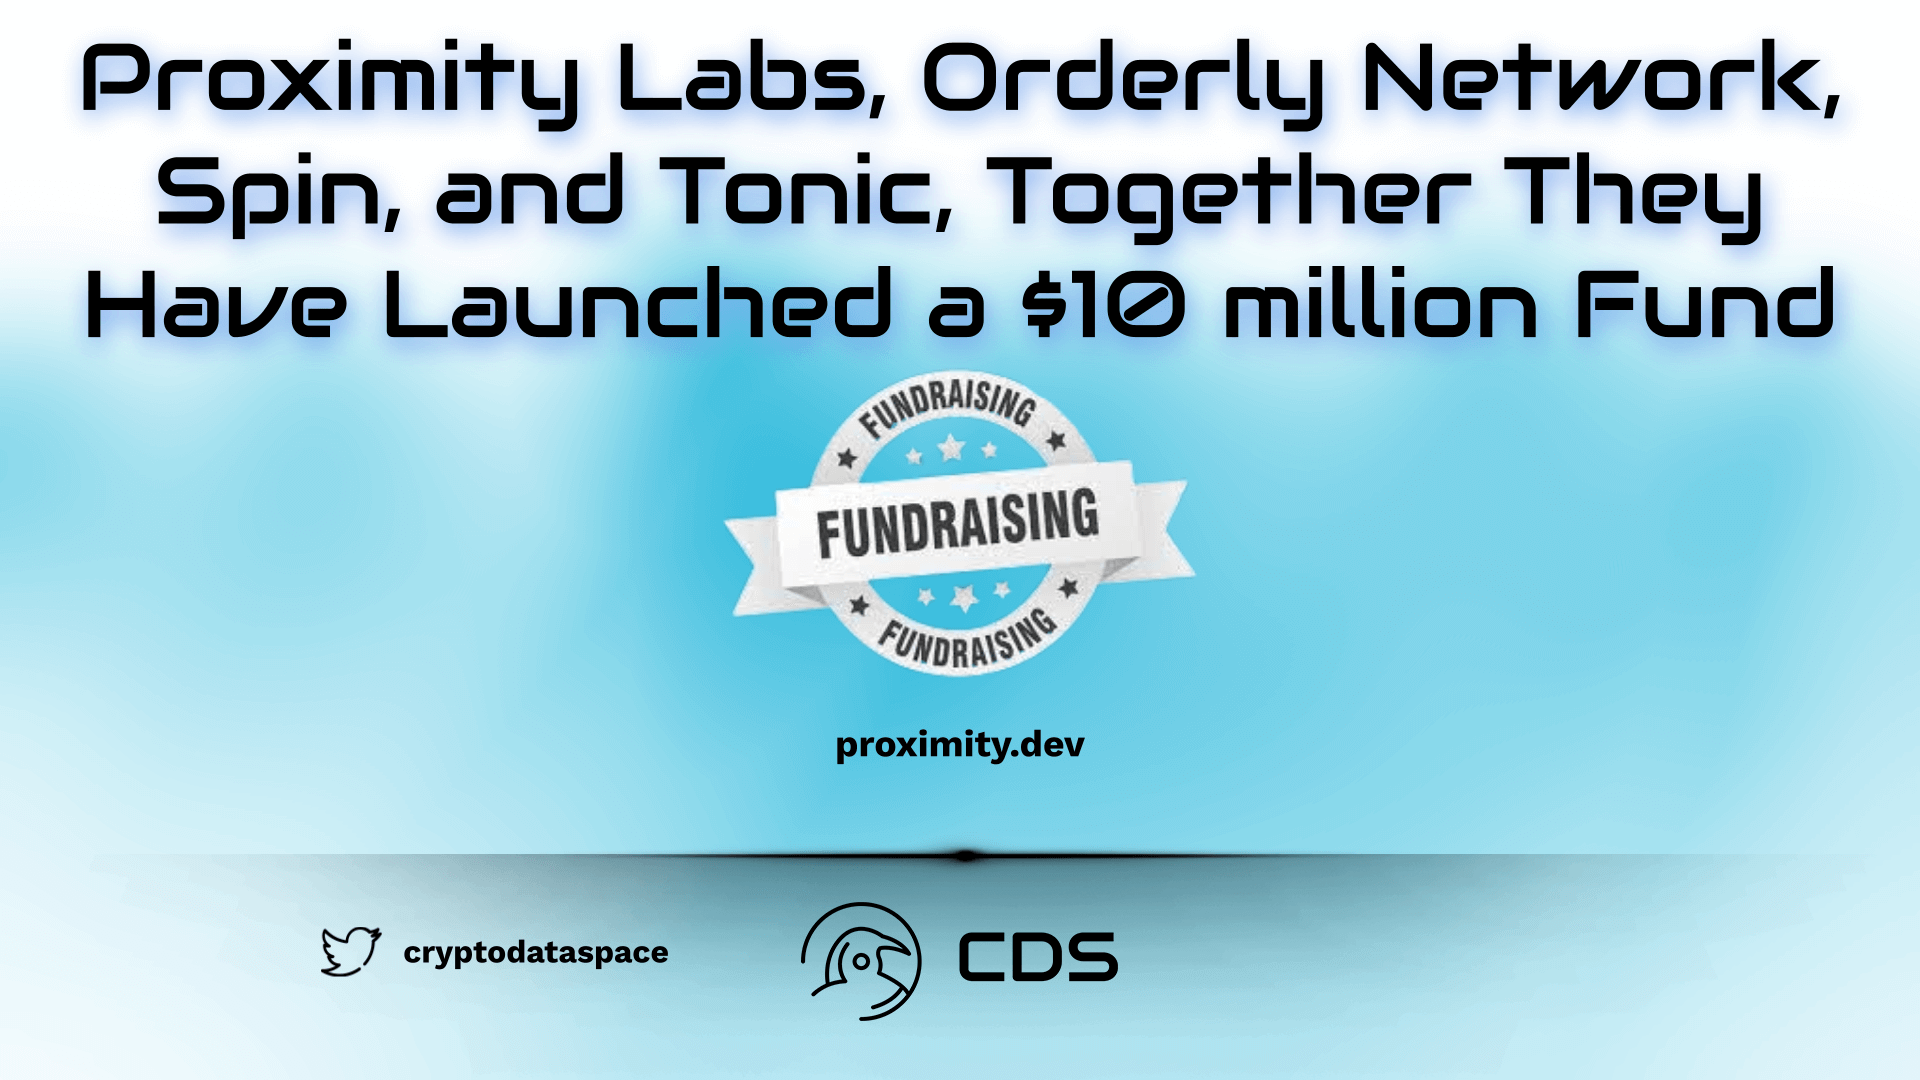 Proximity Labs, Orderly Network, Spin, and Tonic, Together They Have Launched a $10 million Fund